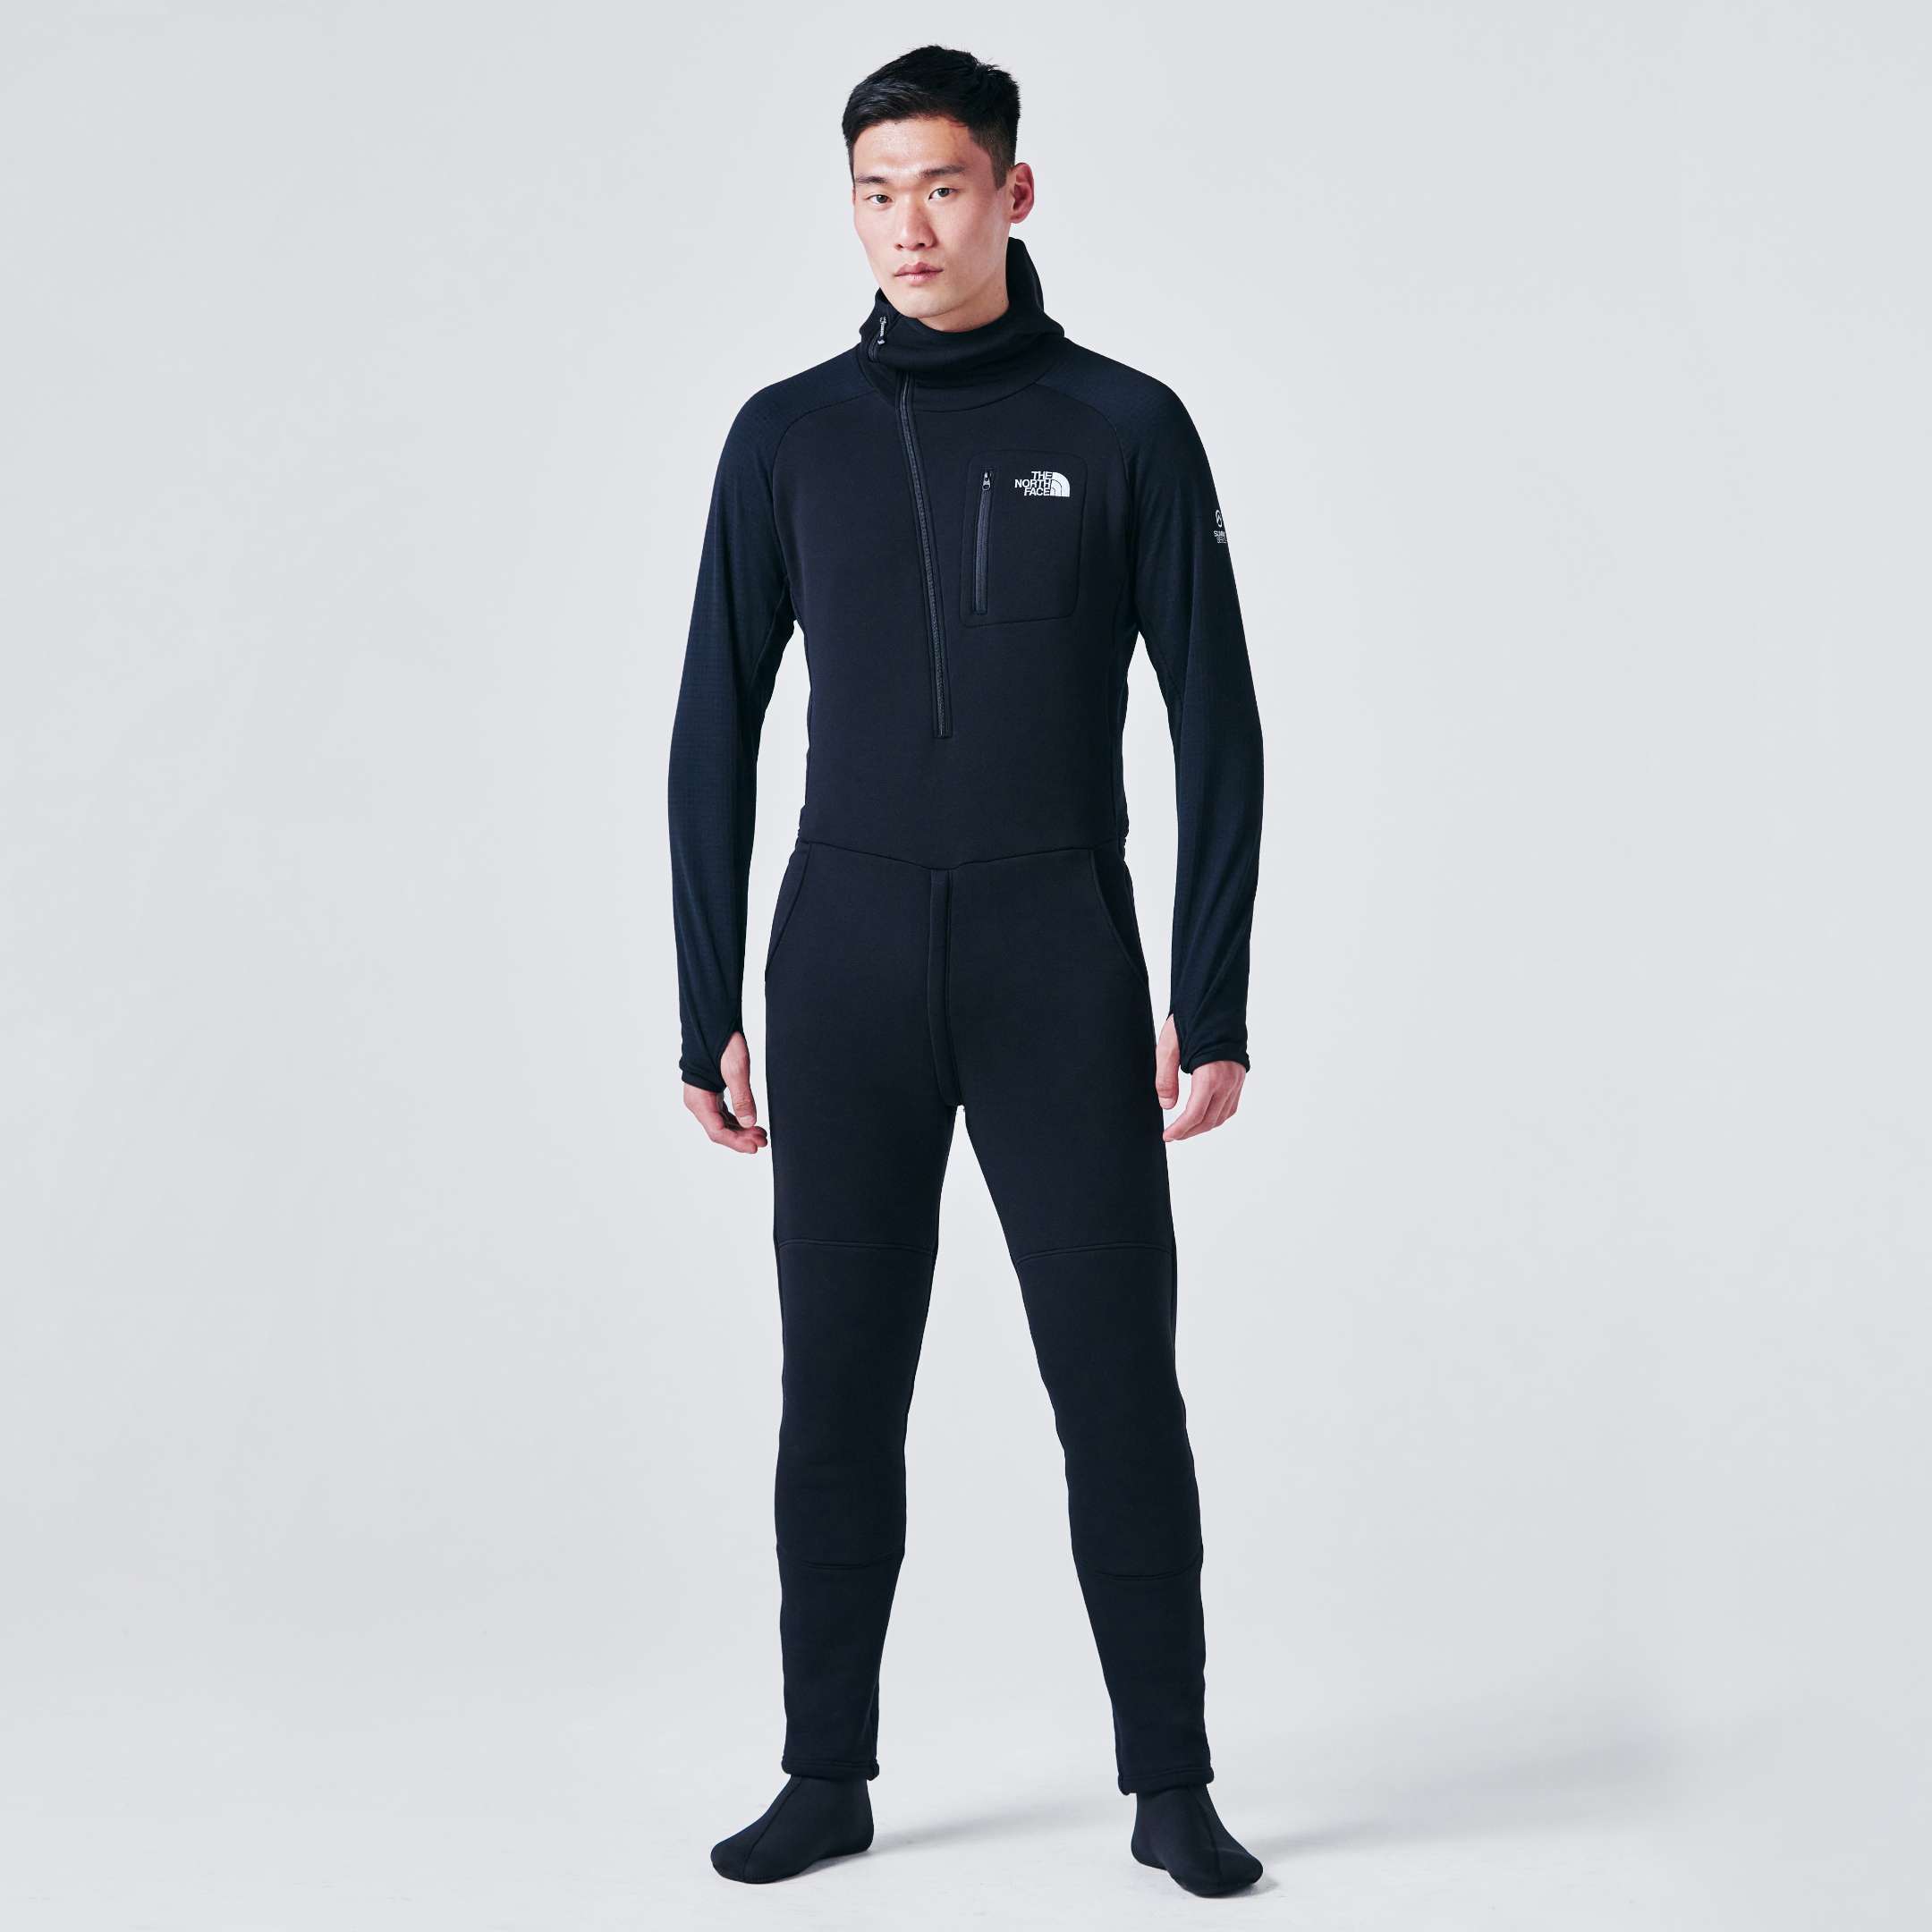 ALPINESTYLE HYBRID ONEPIECE (NL61920 / UNISEX) - THE NORTH FACE 